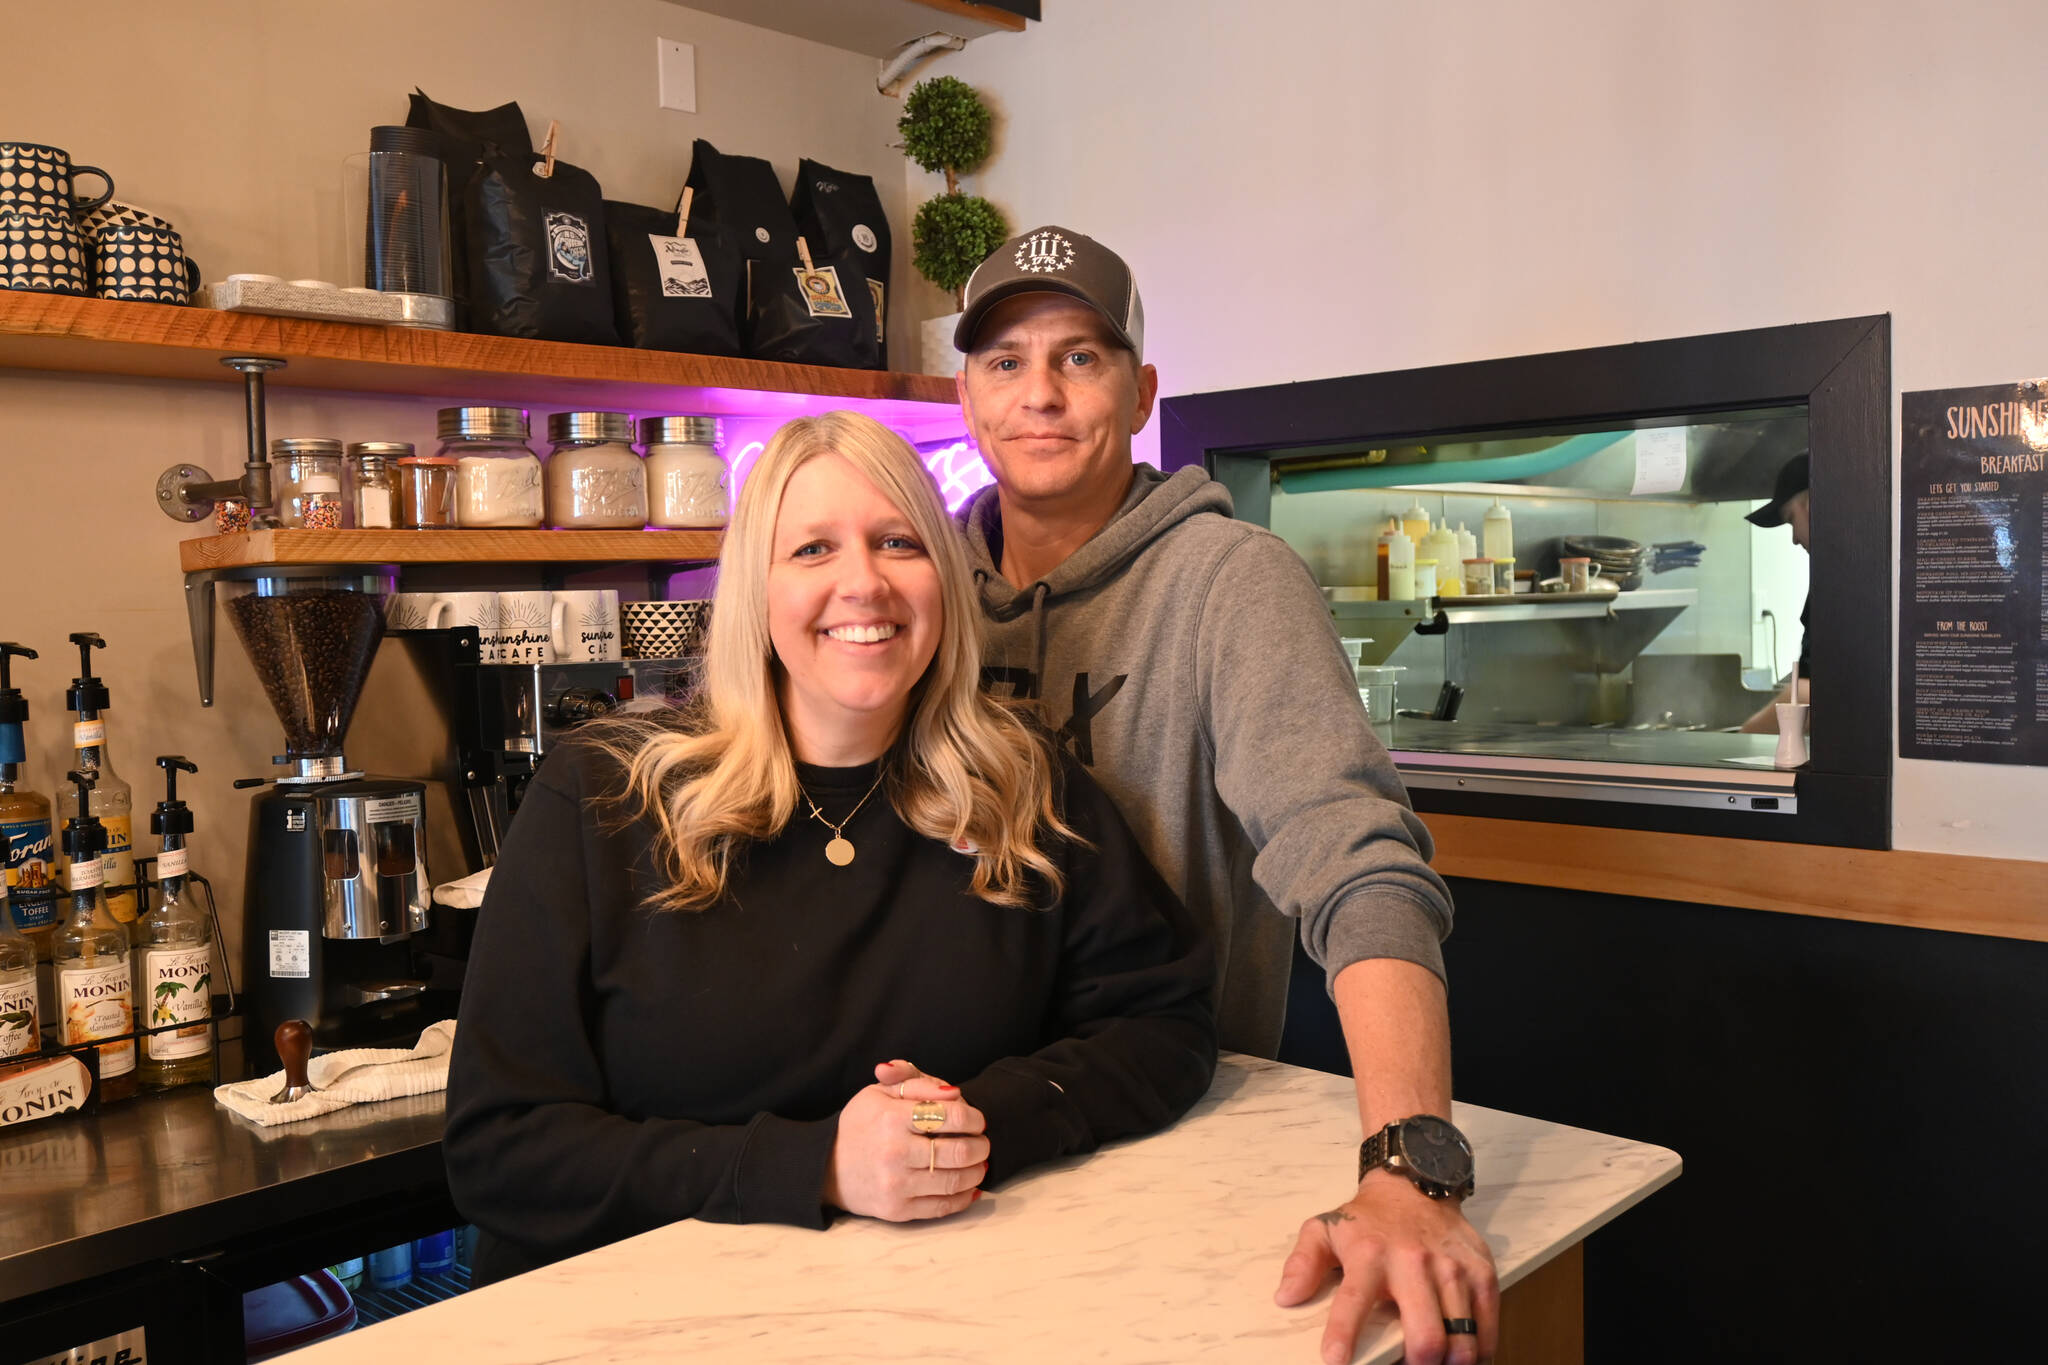 Sequim Gazette photo by Michael Dashiell
Kyla and Josh Washburn, new owners of Sunshine Café, said they are excited to offer fun and good food to the downtown Sequim restaurant.